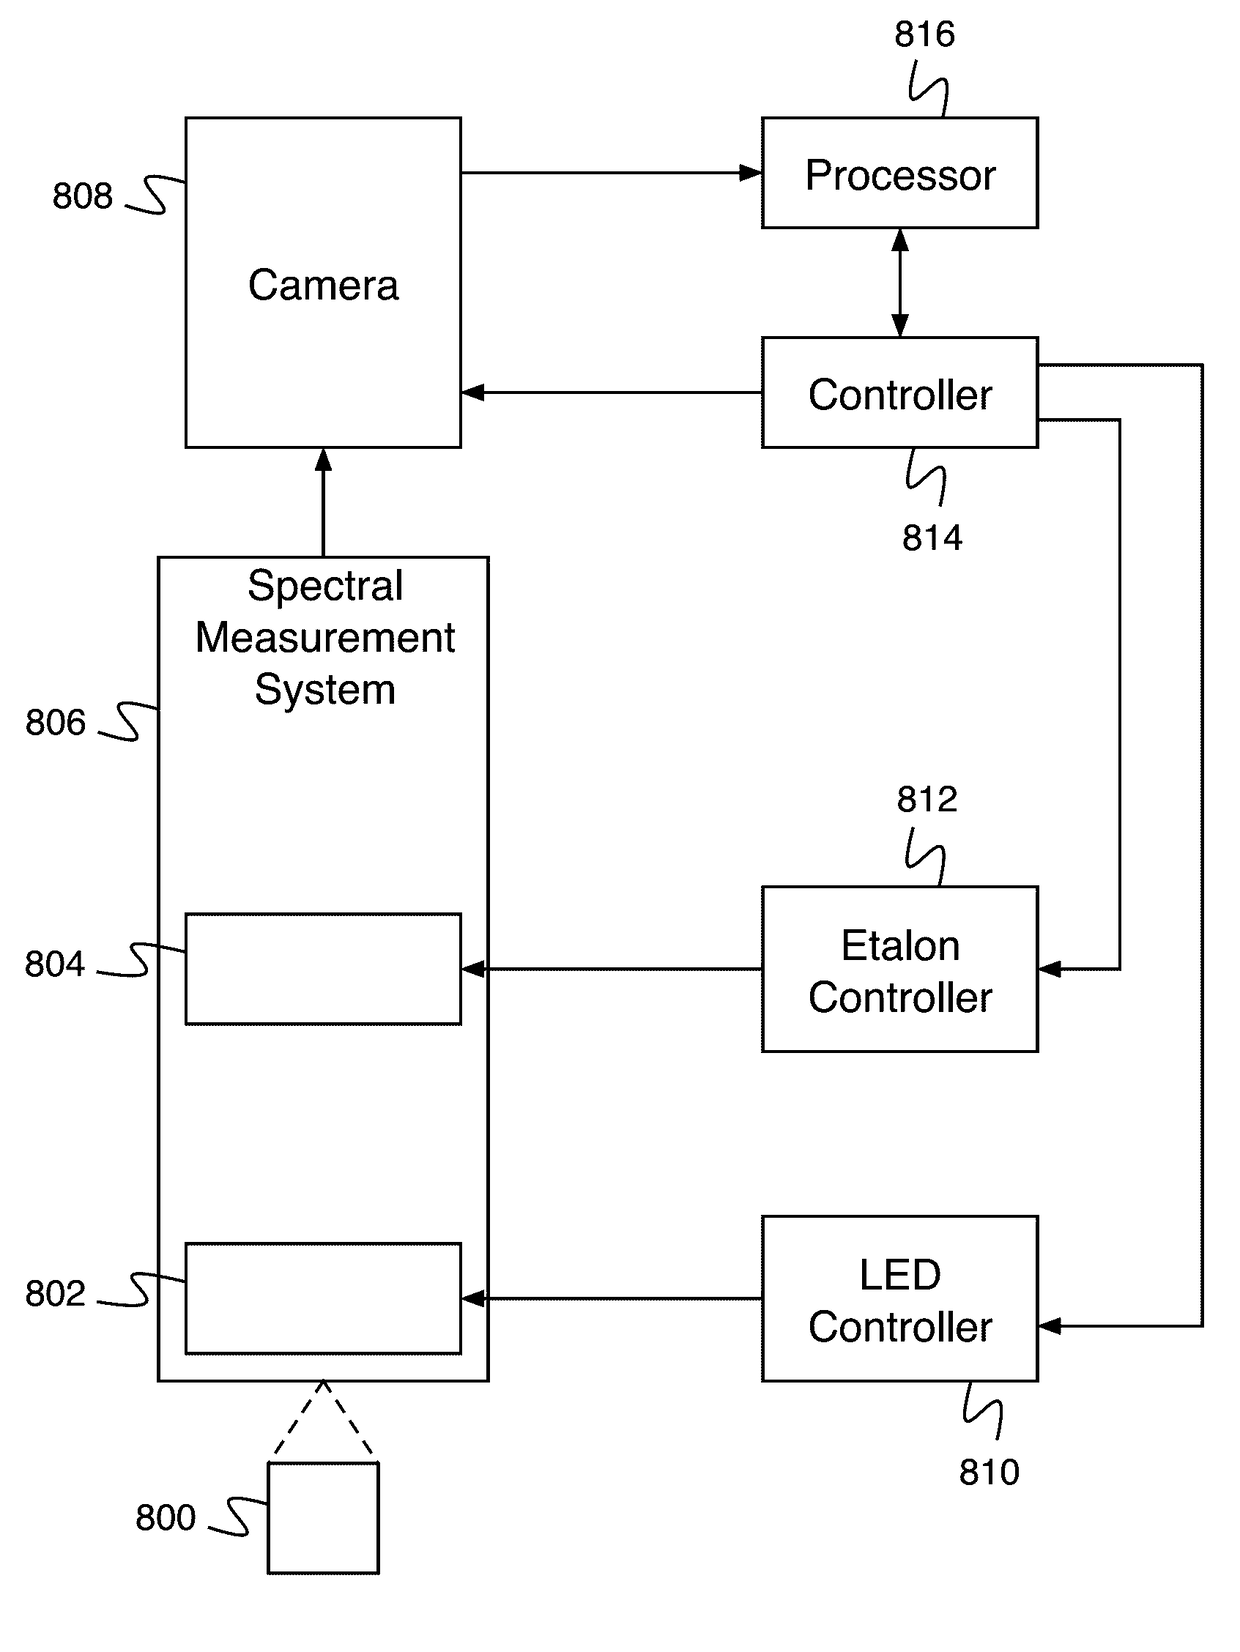 Spectral reading using synchronized LED sources